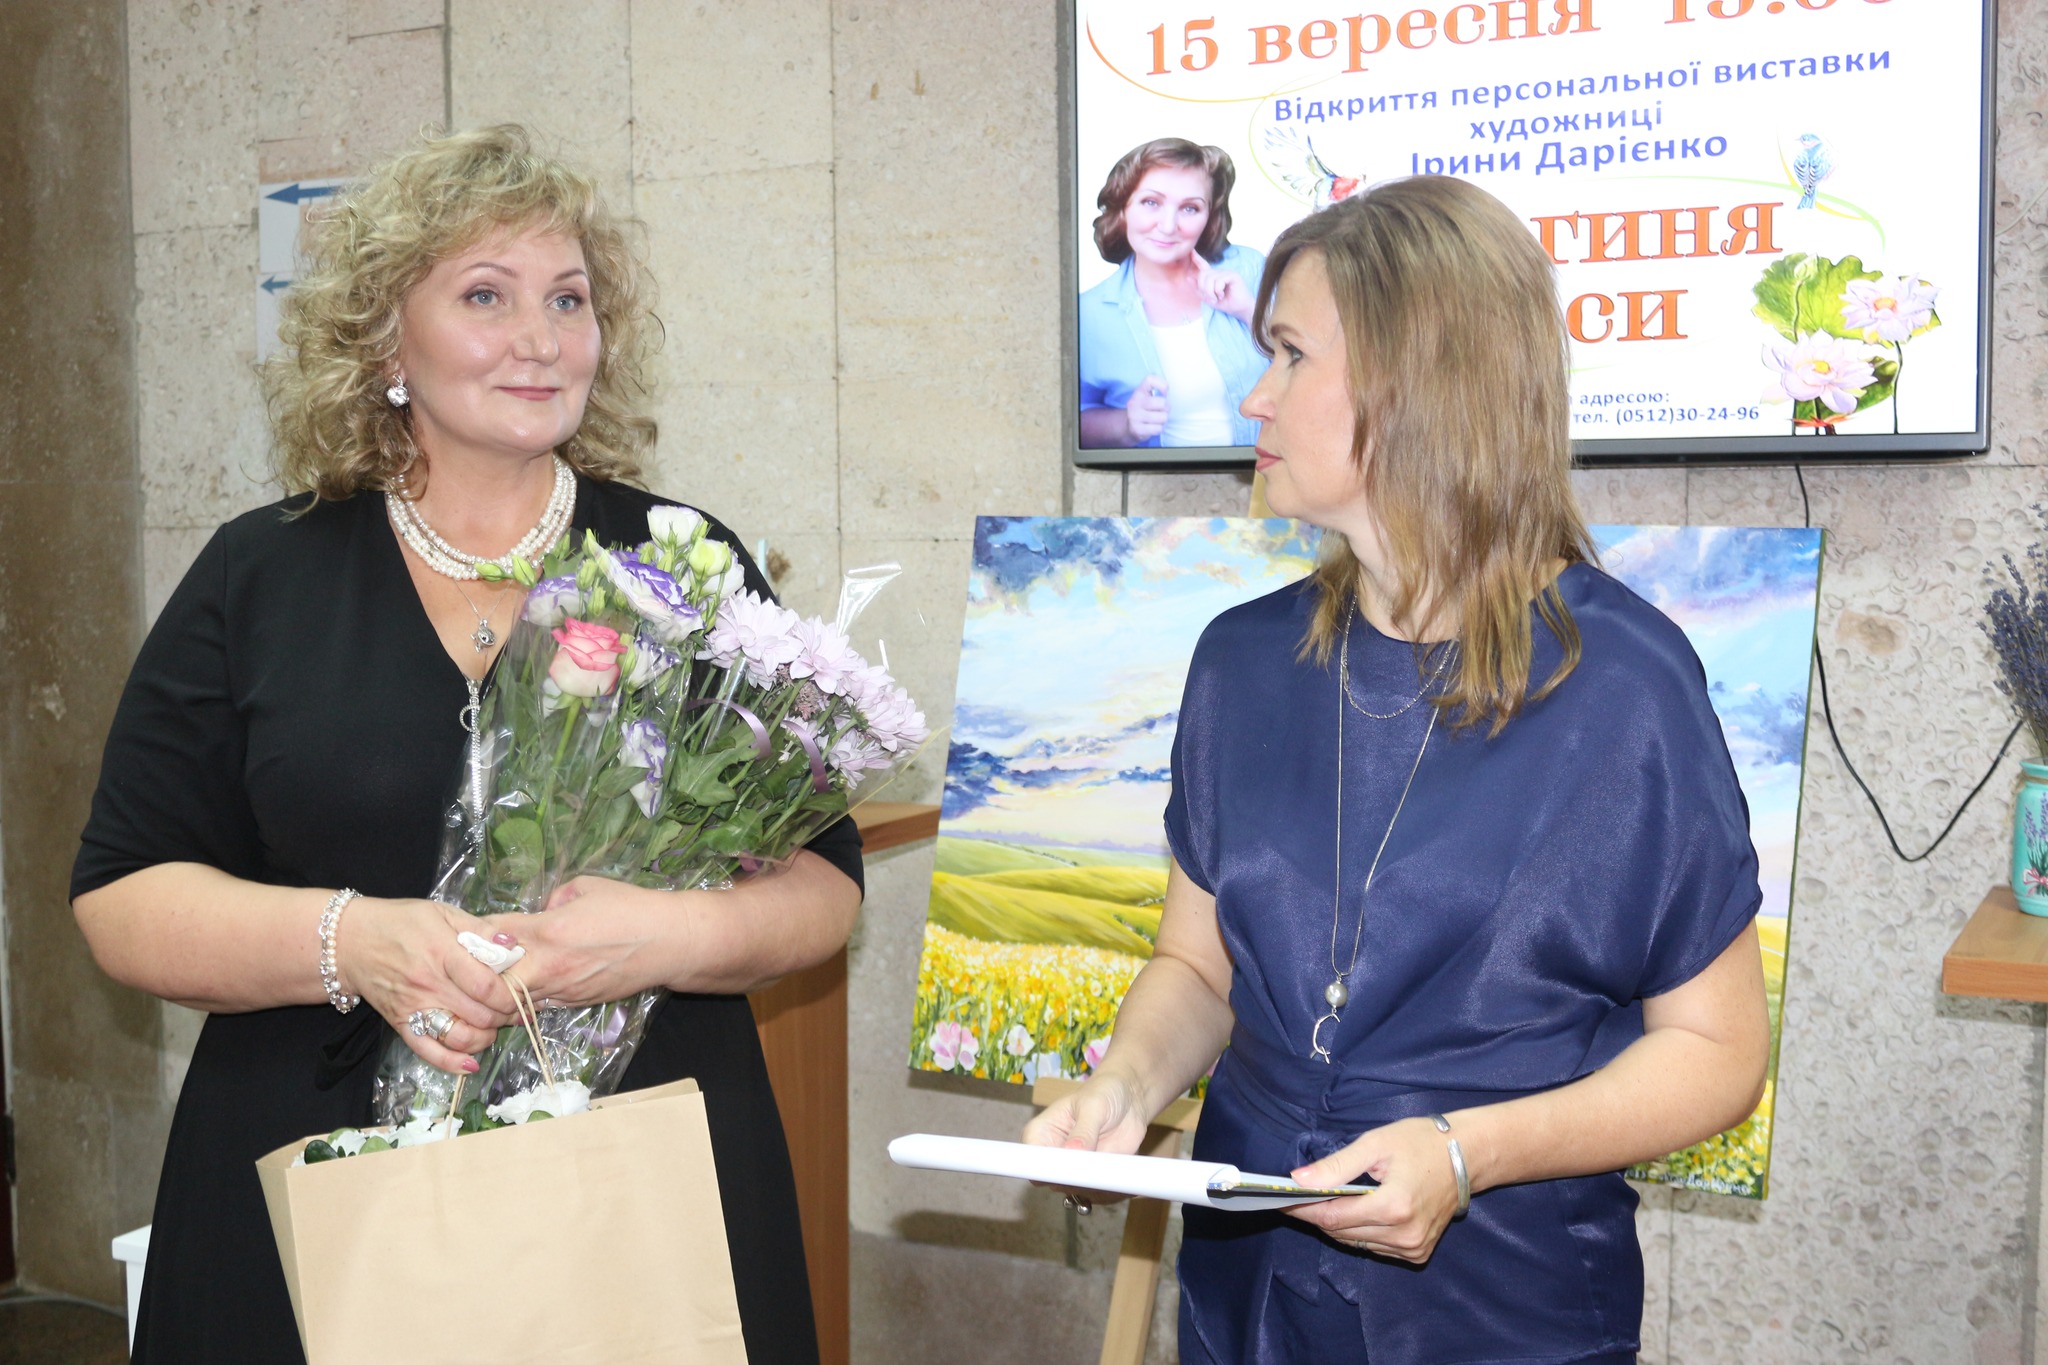 Personal exhibition of the artist Iryna Darienko "Berehynia of Beauty" opened in the Central City Library named after M. L. Kropyvnytskyi